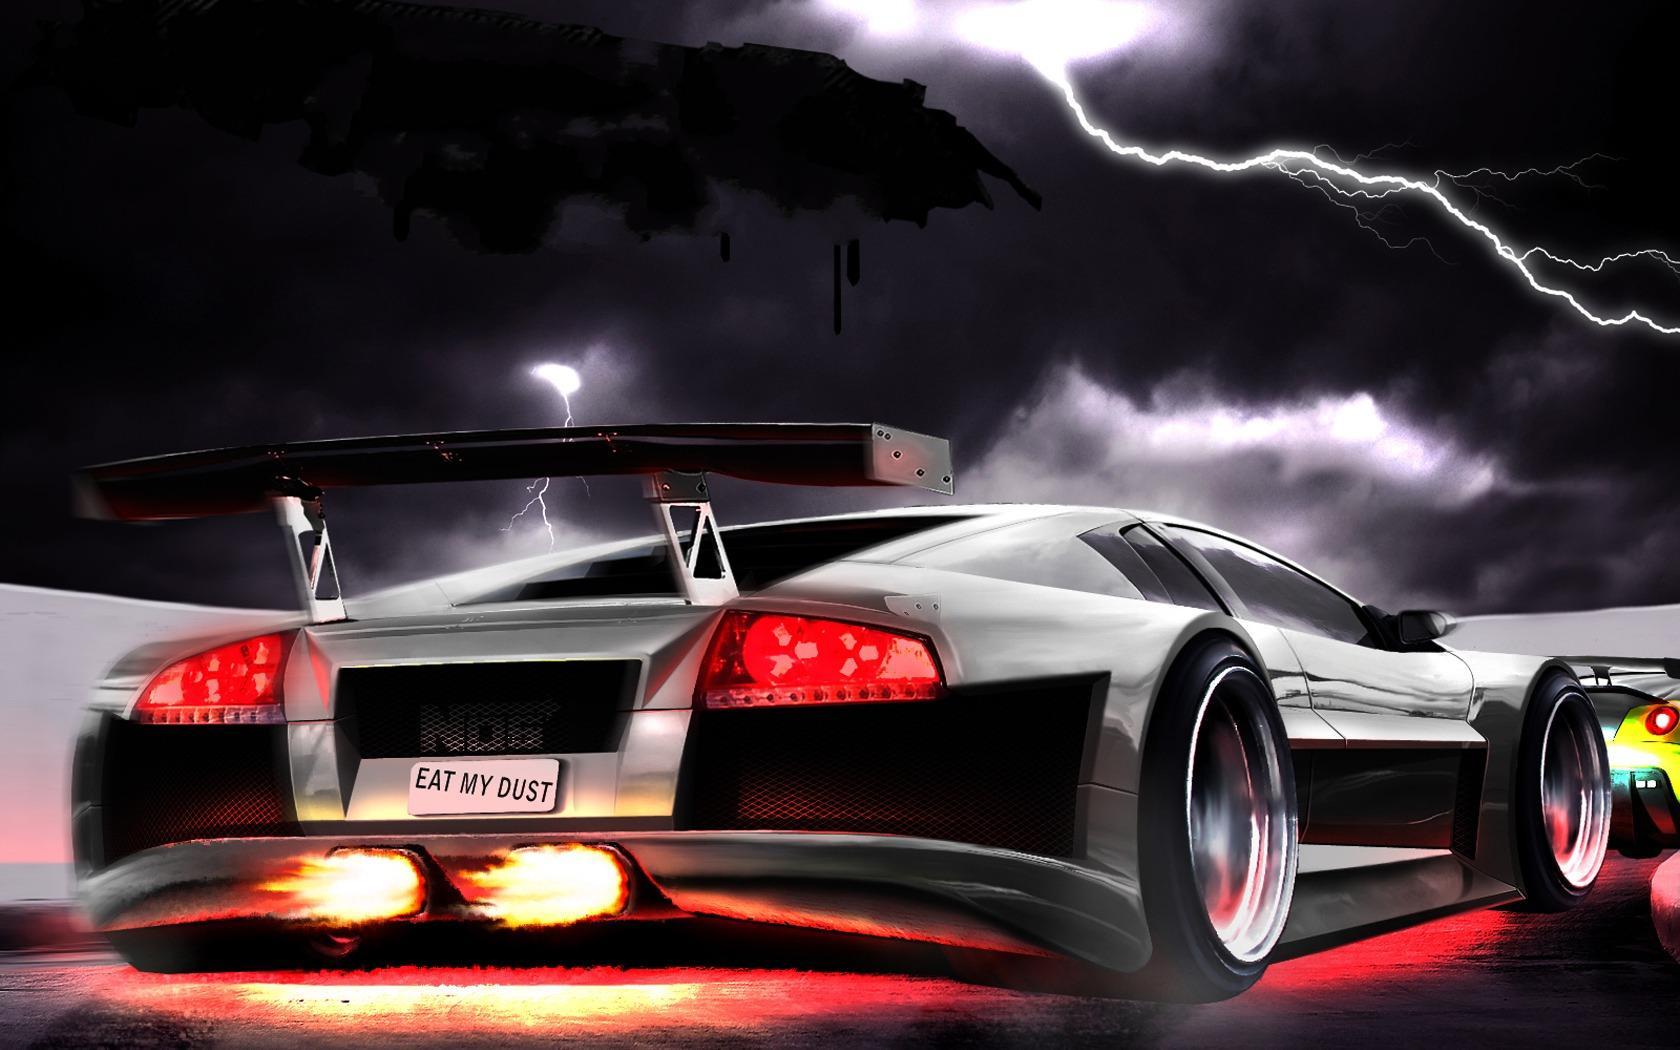 Best 3D Wallpaper Of Cars For Pc High Quality Desktop Cave iPhone